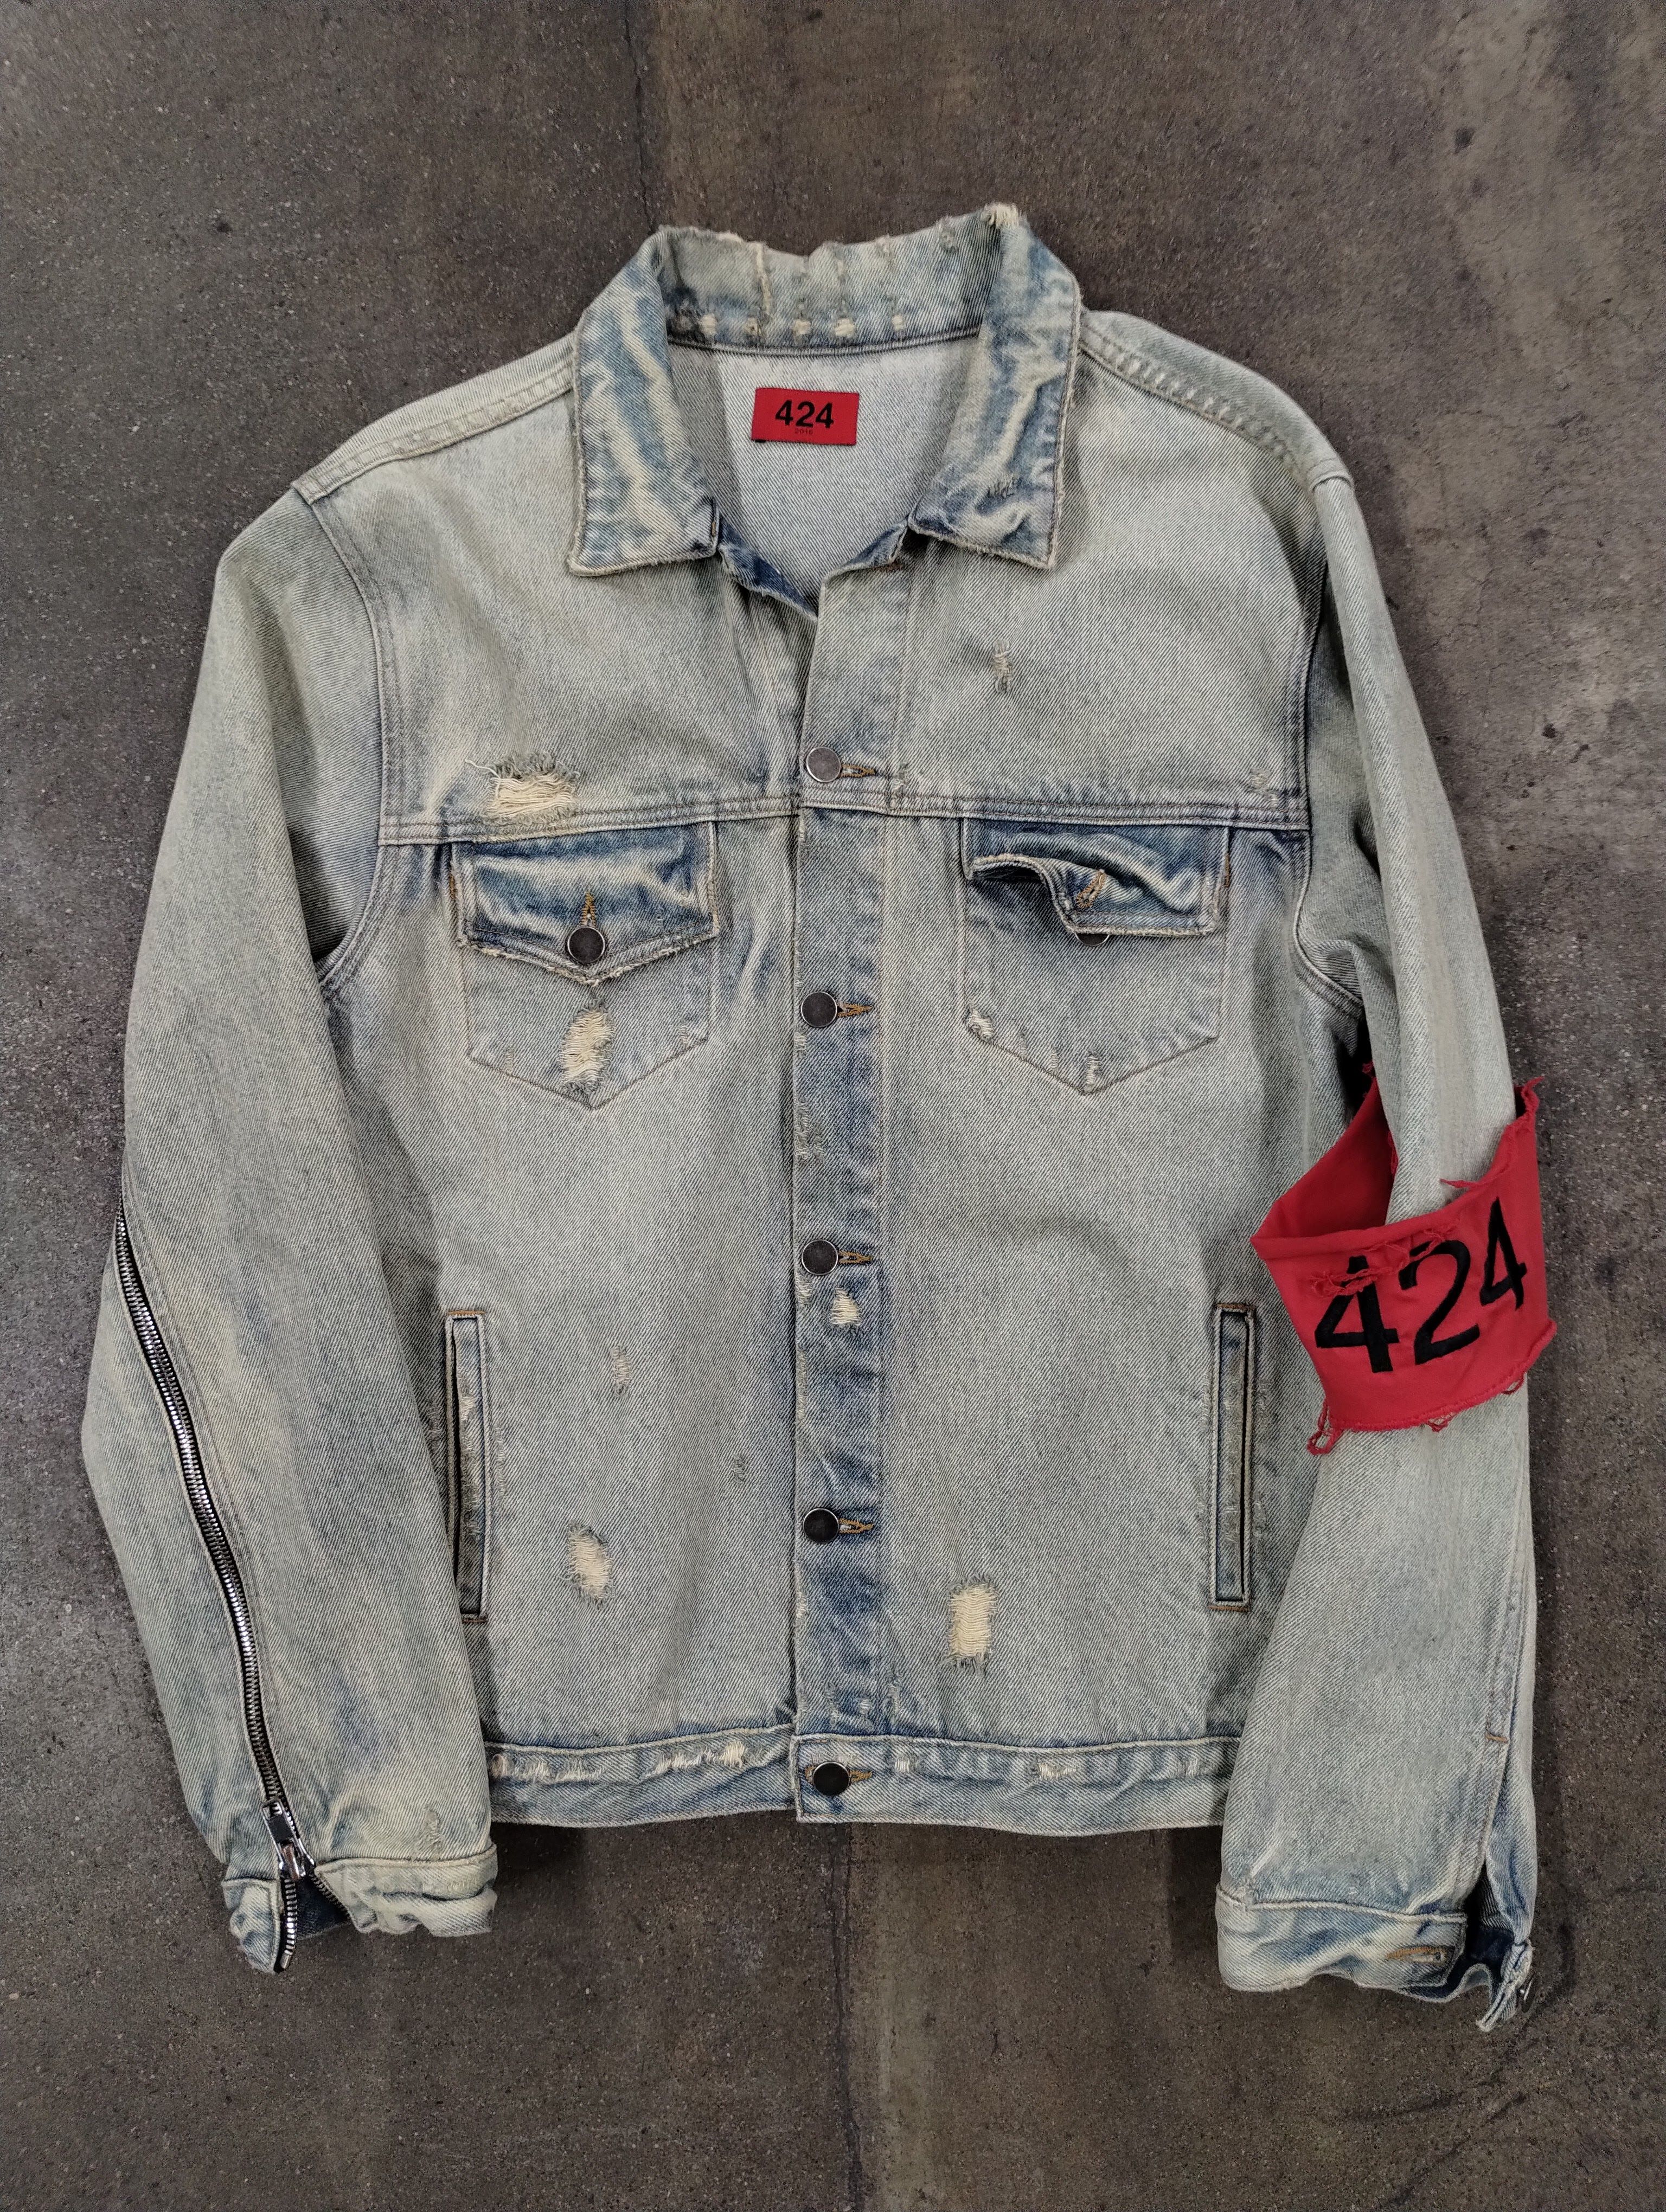 Pre-owned 424 On Fairfax 2015 Original Red Armband Denim Jacket In Blue